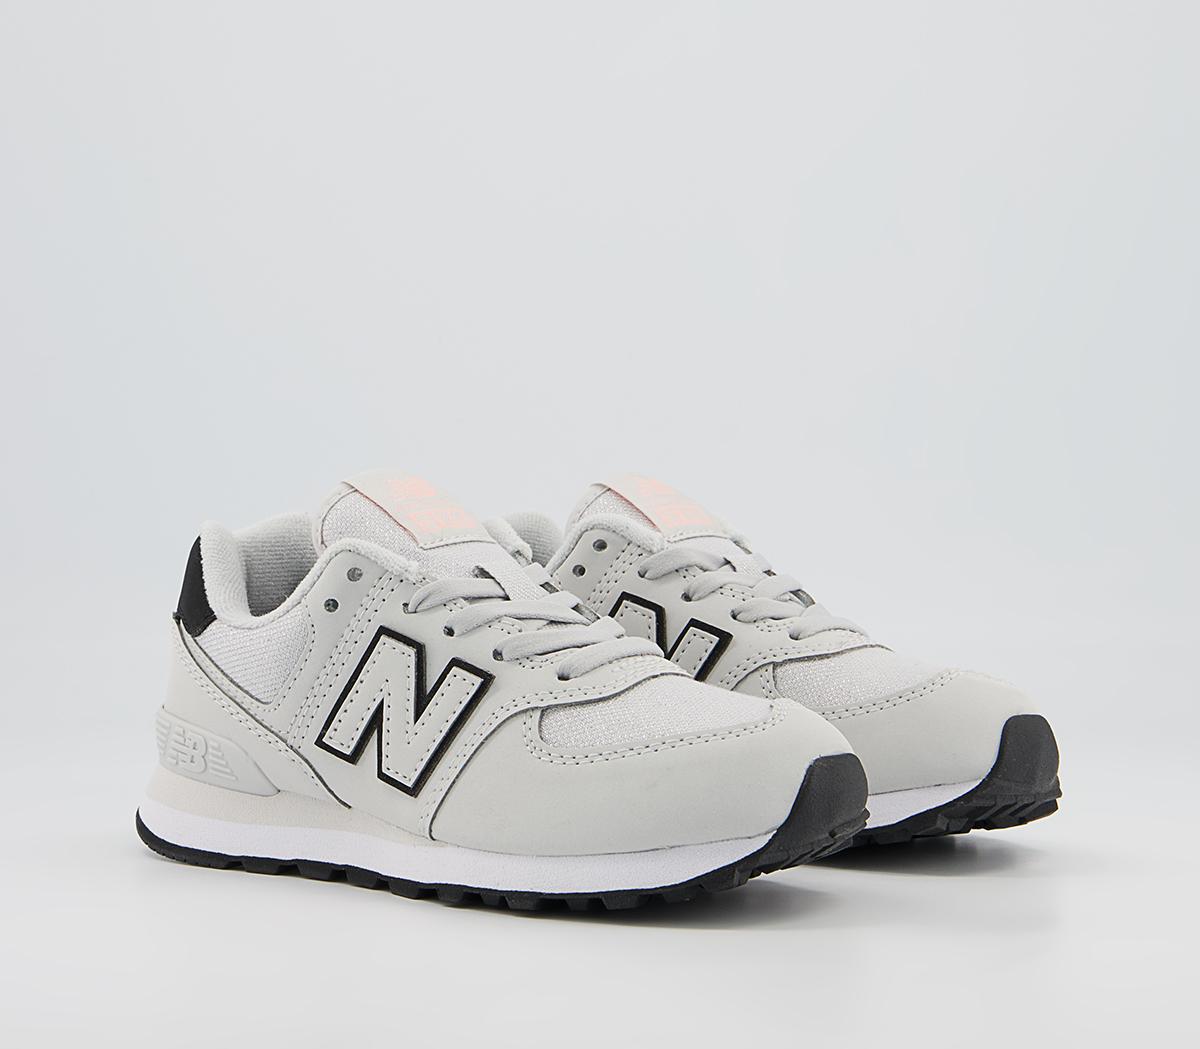 New Balance 574 Kids Trainers White Black Rubber, 12 Youth